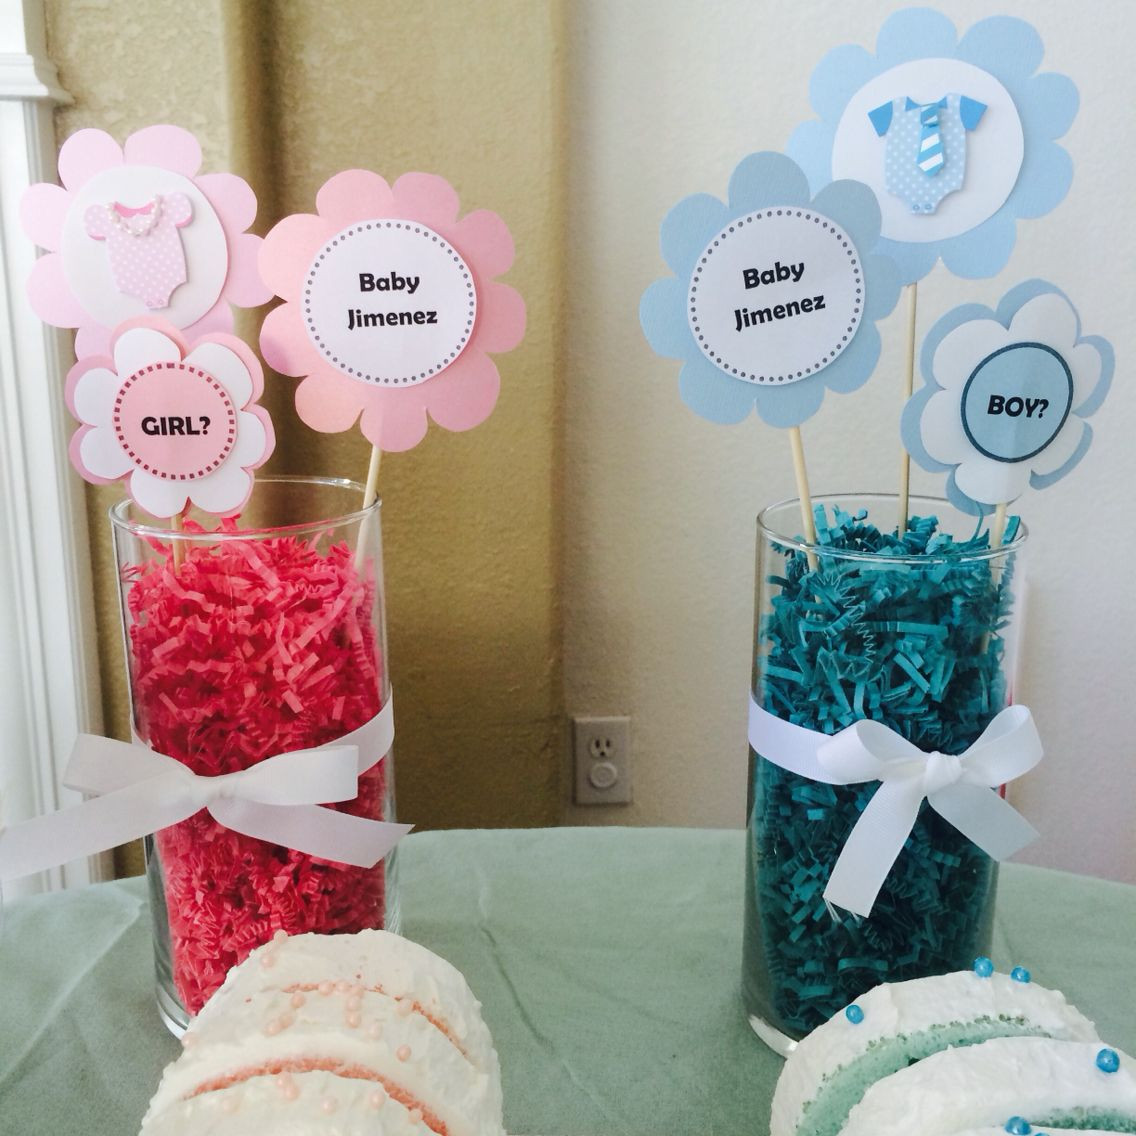 Baby Gender Reveal Decoration Ideas
 DIY centerpieces for gender reveal party